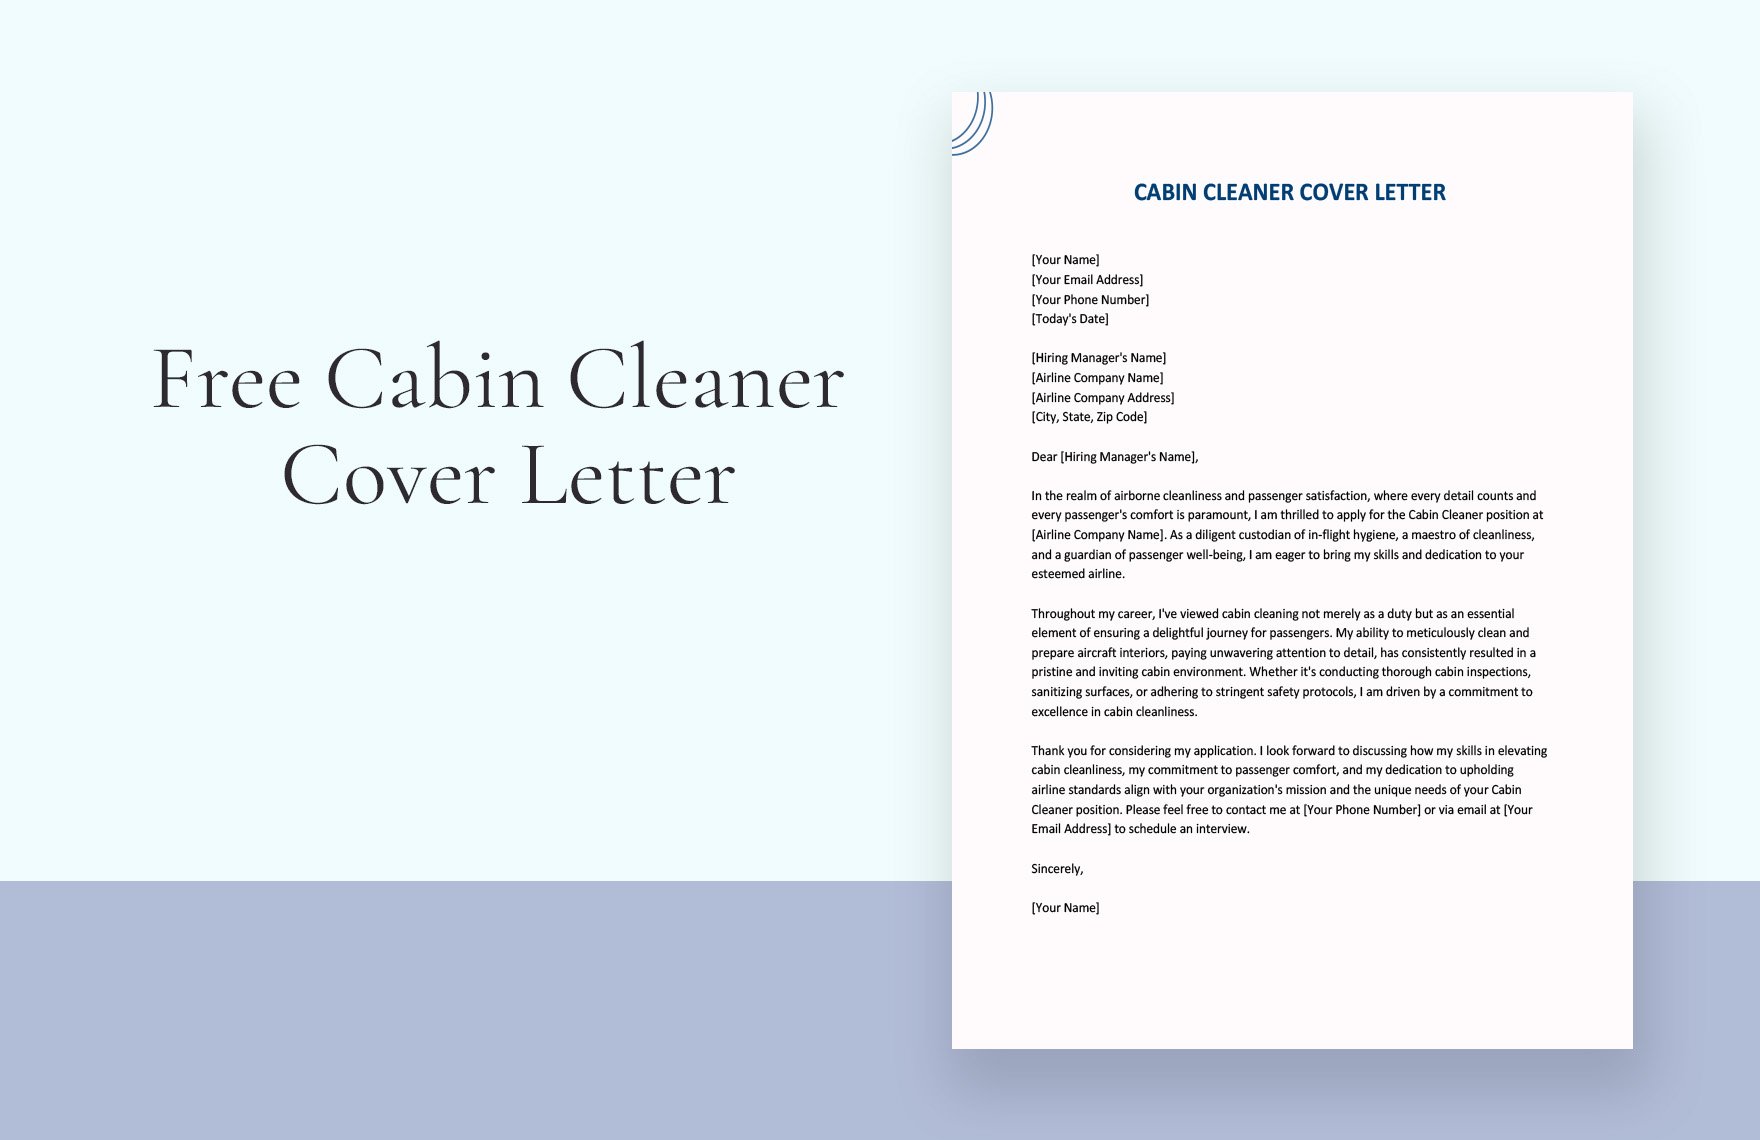 Cabin Cleaner Cover Letter in Word, Google Docs